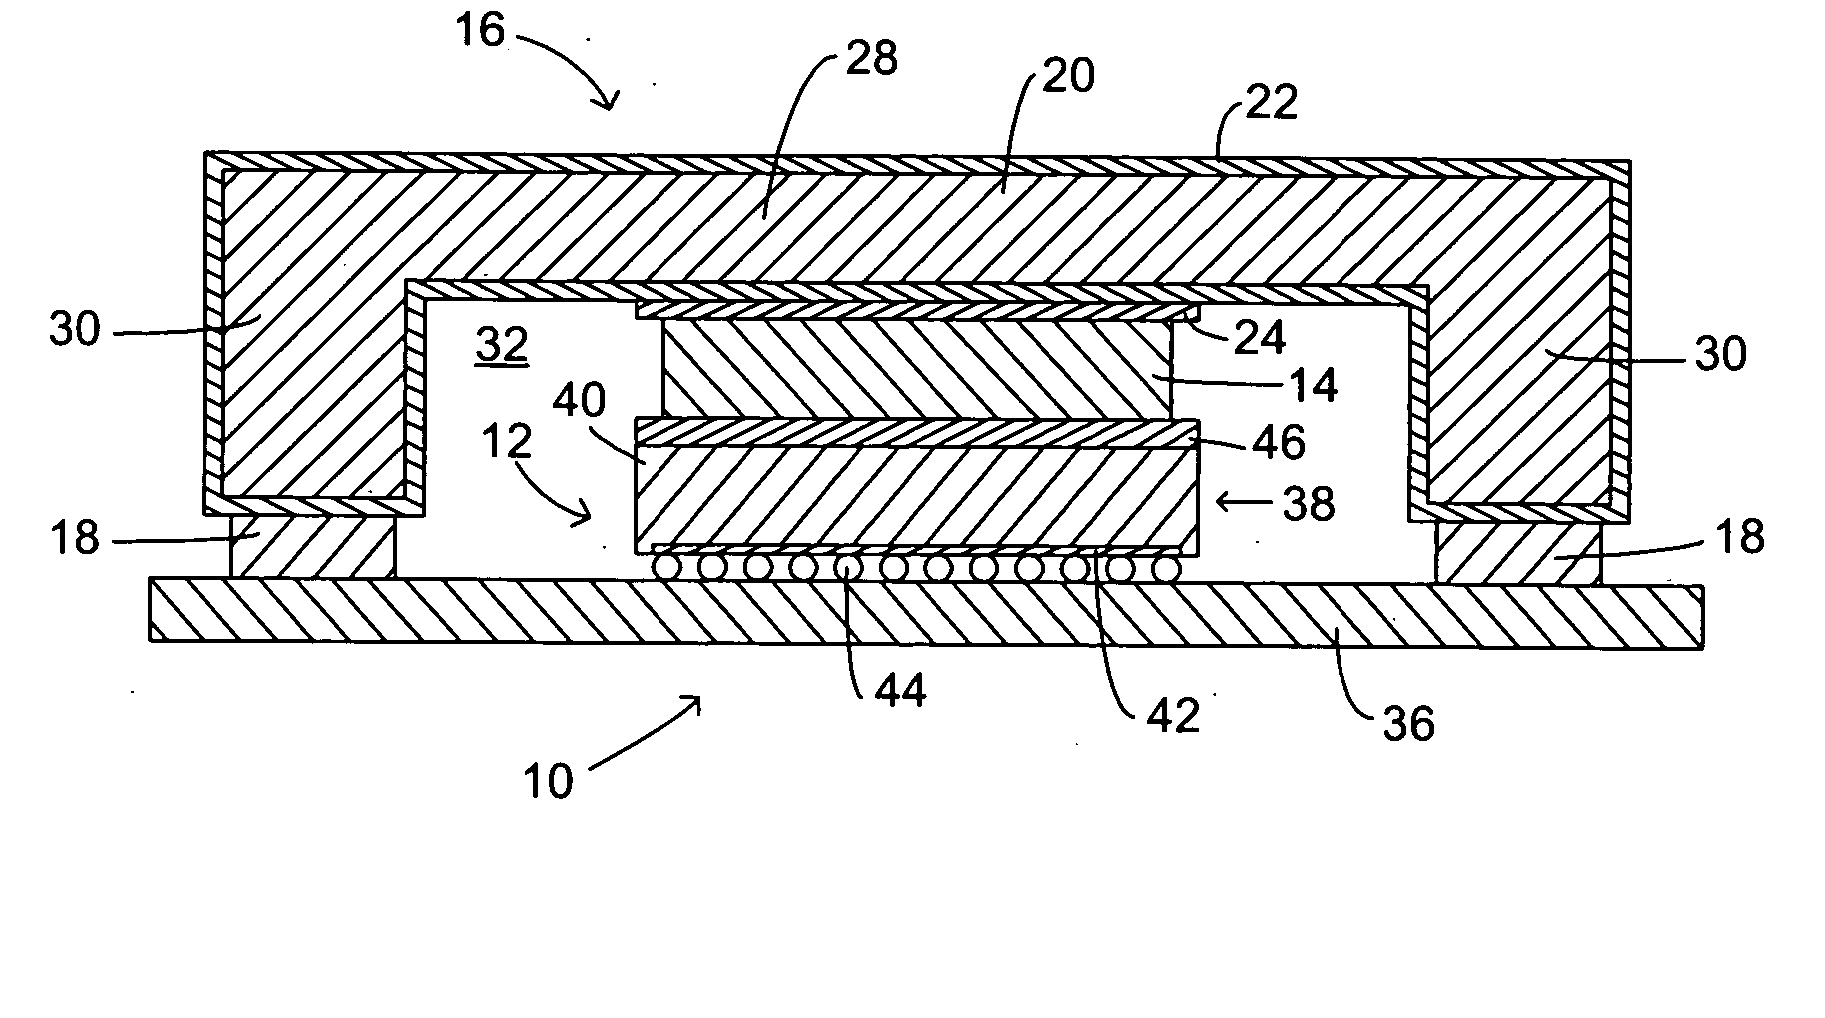 Electronic assembly having an indium wetting layer on a thermally conductive body